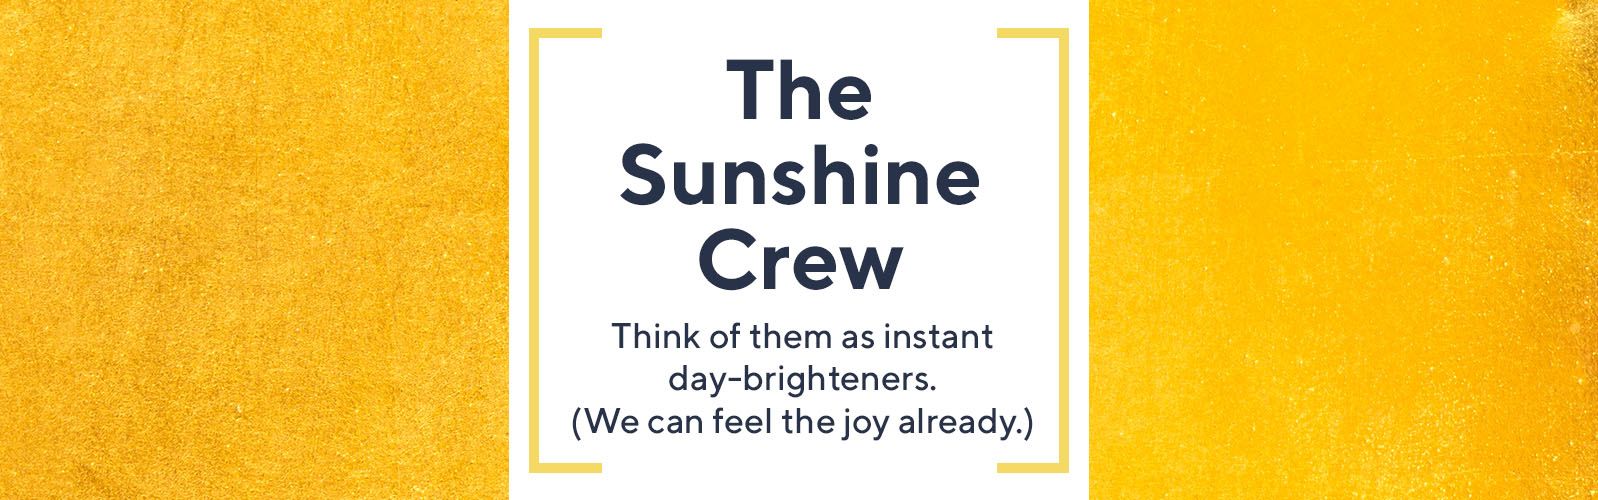 The Sunshine Crew  Think of them as instant day-brighteners. (We can feel the joy already.)